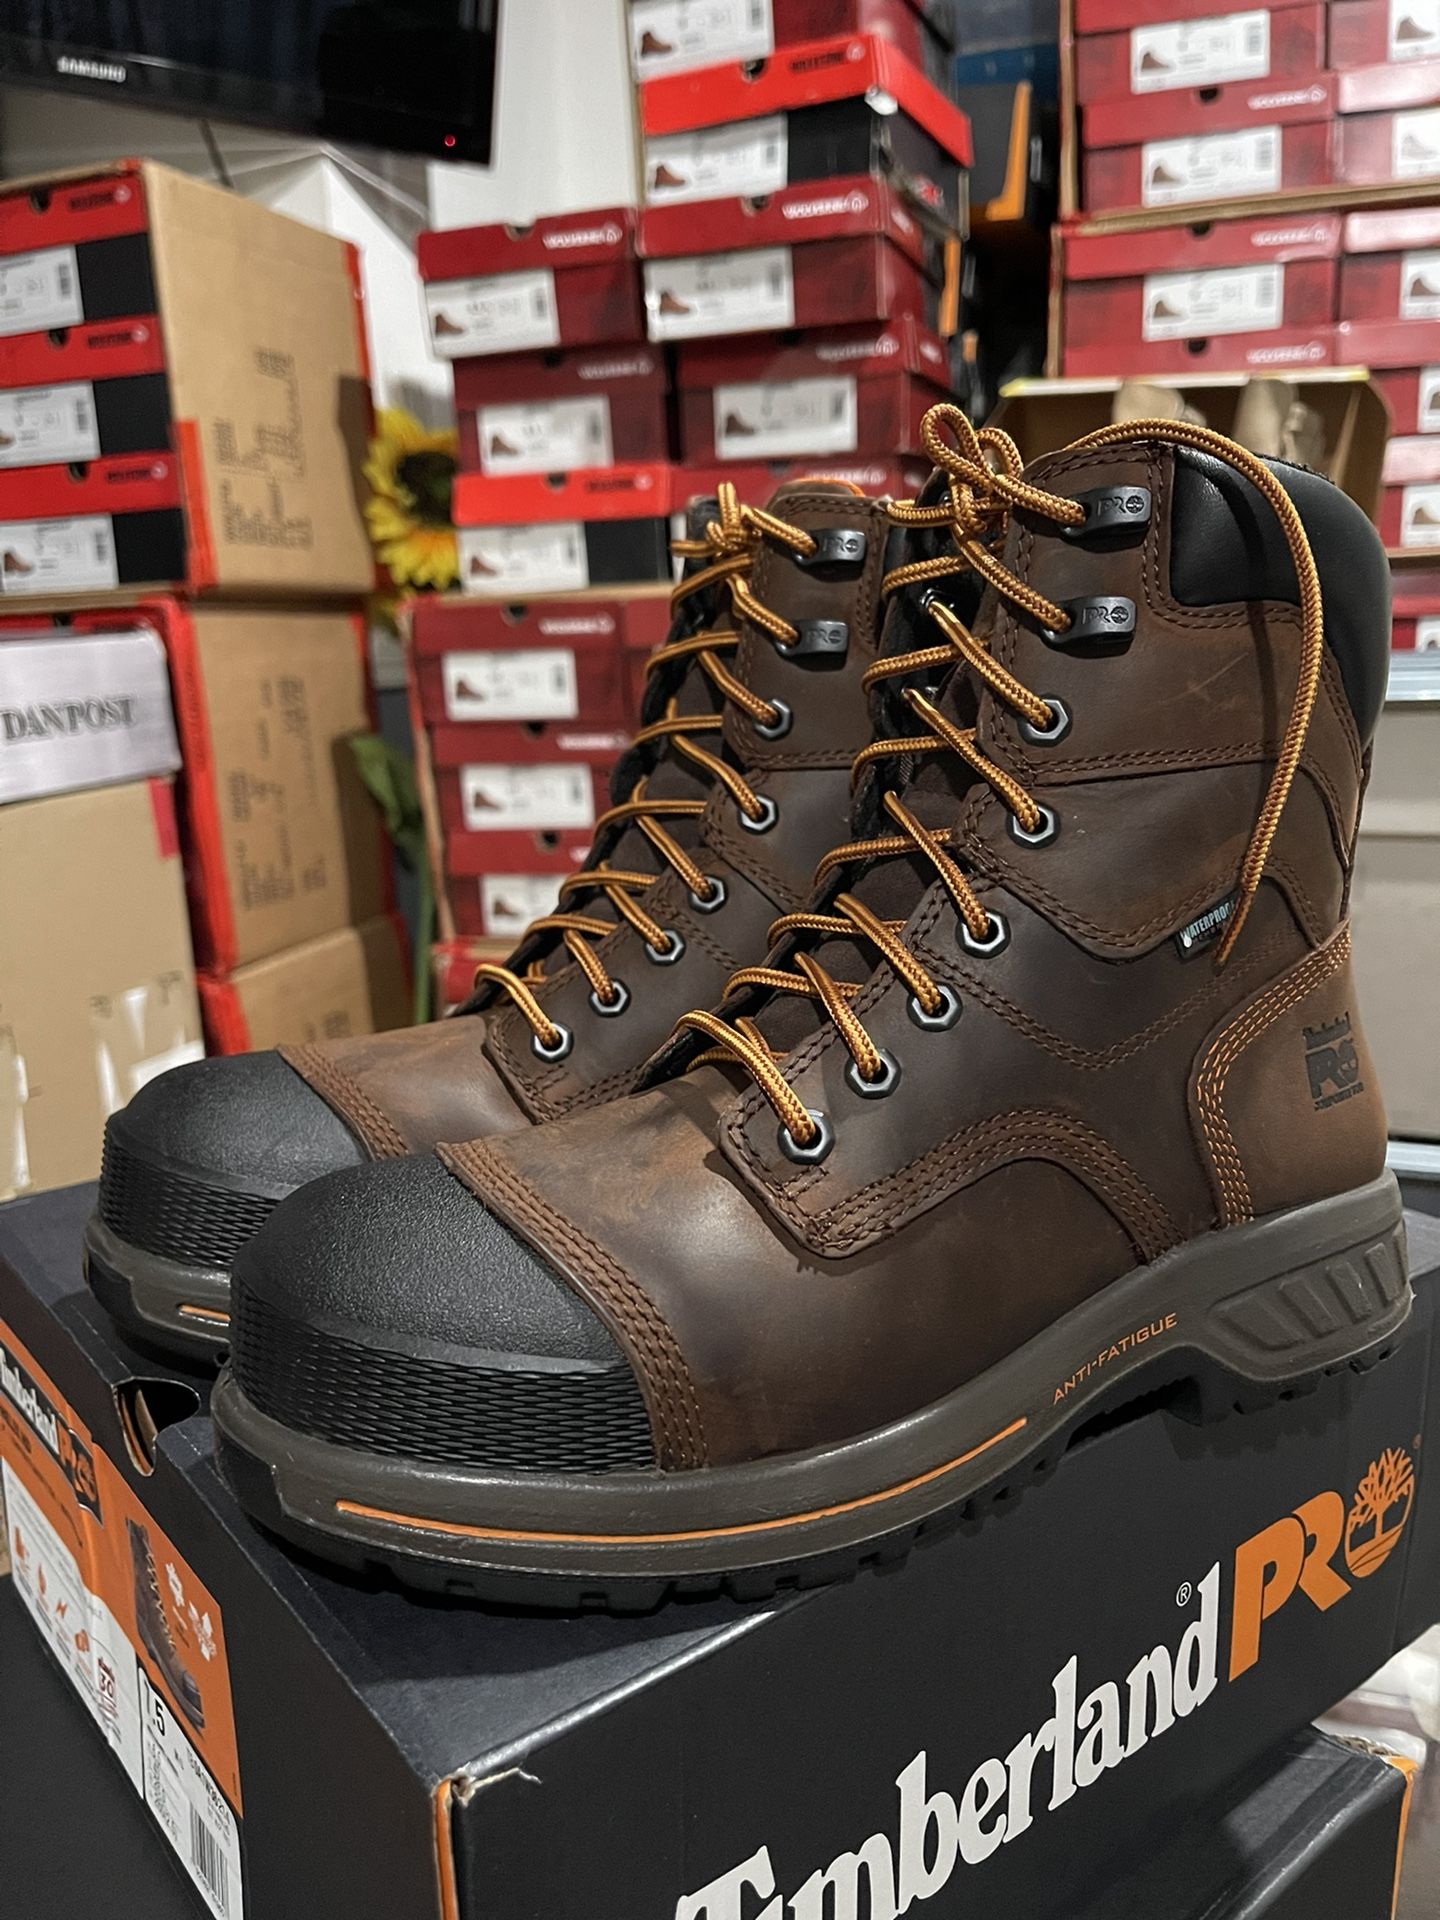 Work Boots 🥾// TIMBERLAND PRO//WATERPROOF//ANTY FATIGUE//400g INSULATED// Free Delivery 🚚 